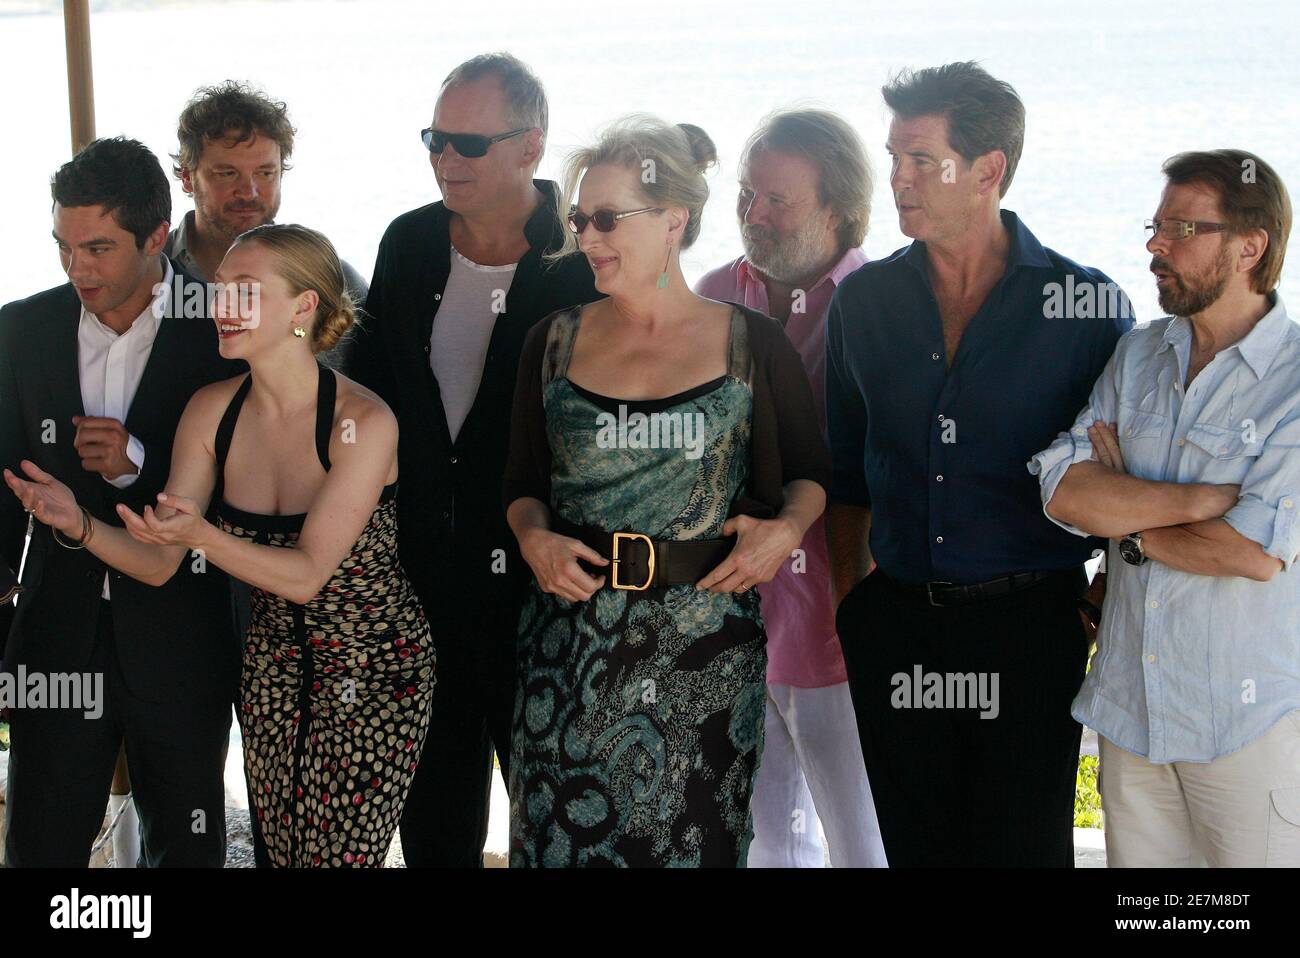 L-R) Dominic Cooper, Colin Firth, Amanda Seyfried, Stellan Skarsgard, Meryl  Streep, former ABBA member Benny Andersson, Pierce Brosnan and former ABBA  member Bjorn Ulvaeus pose during a photo opportunity at a promotional